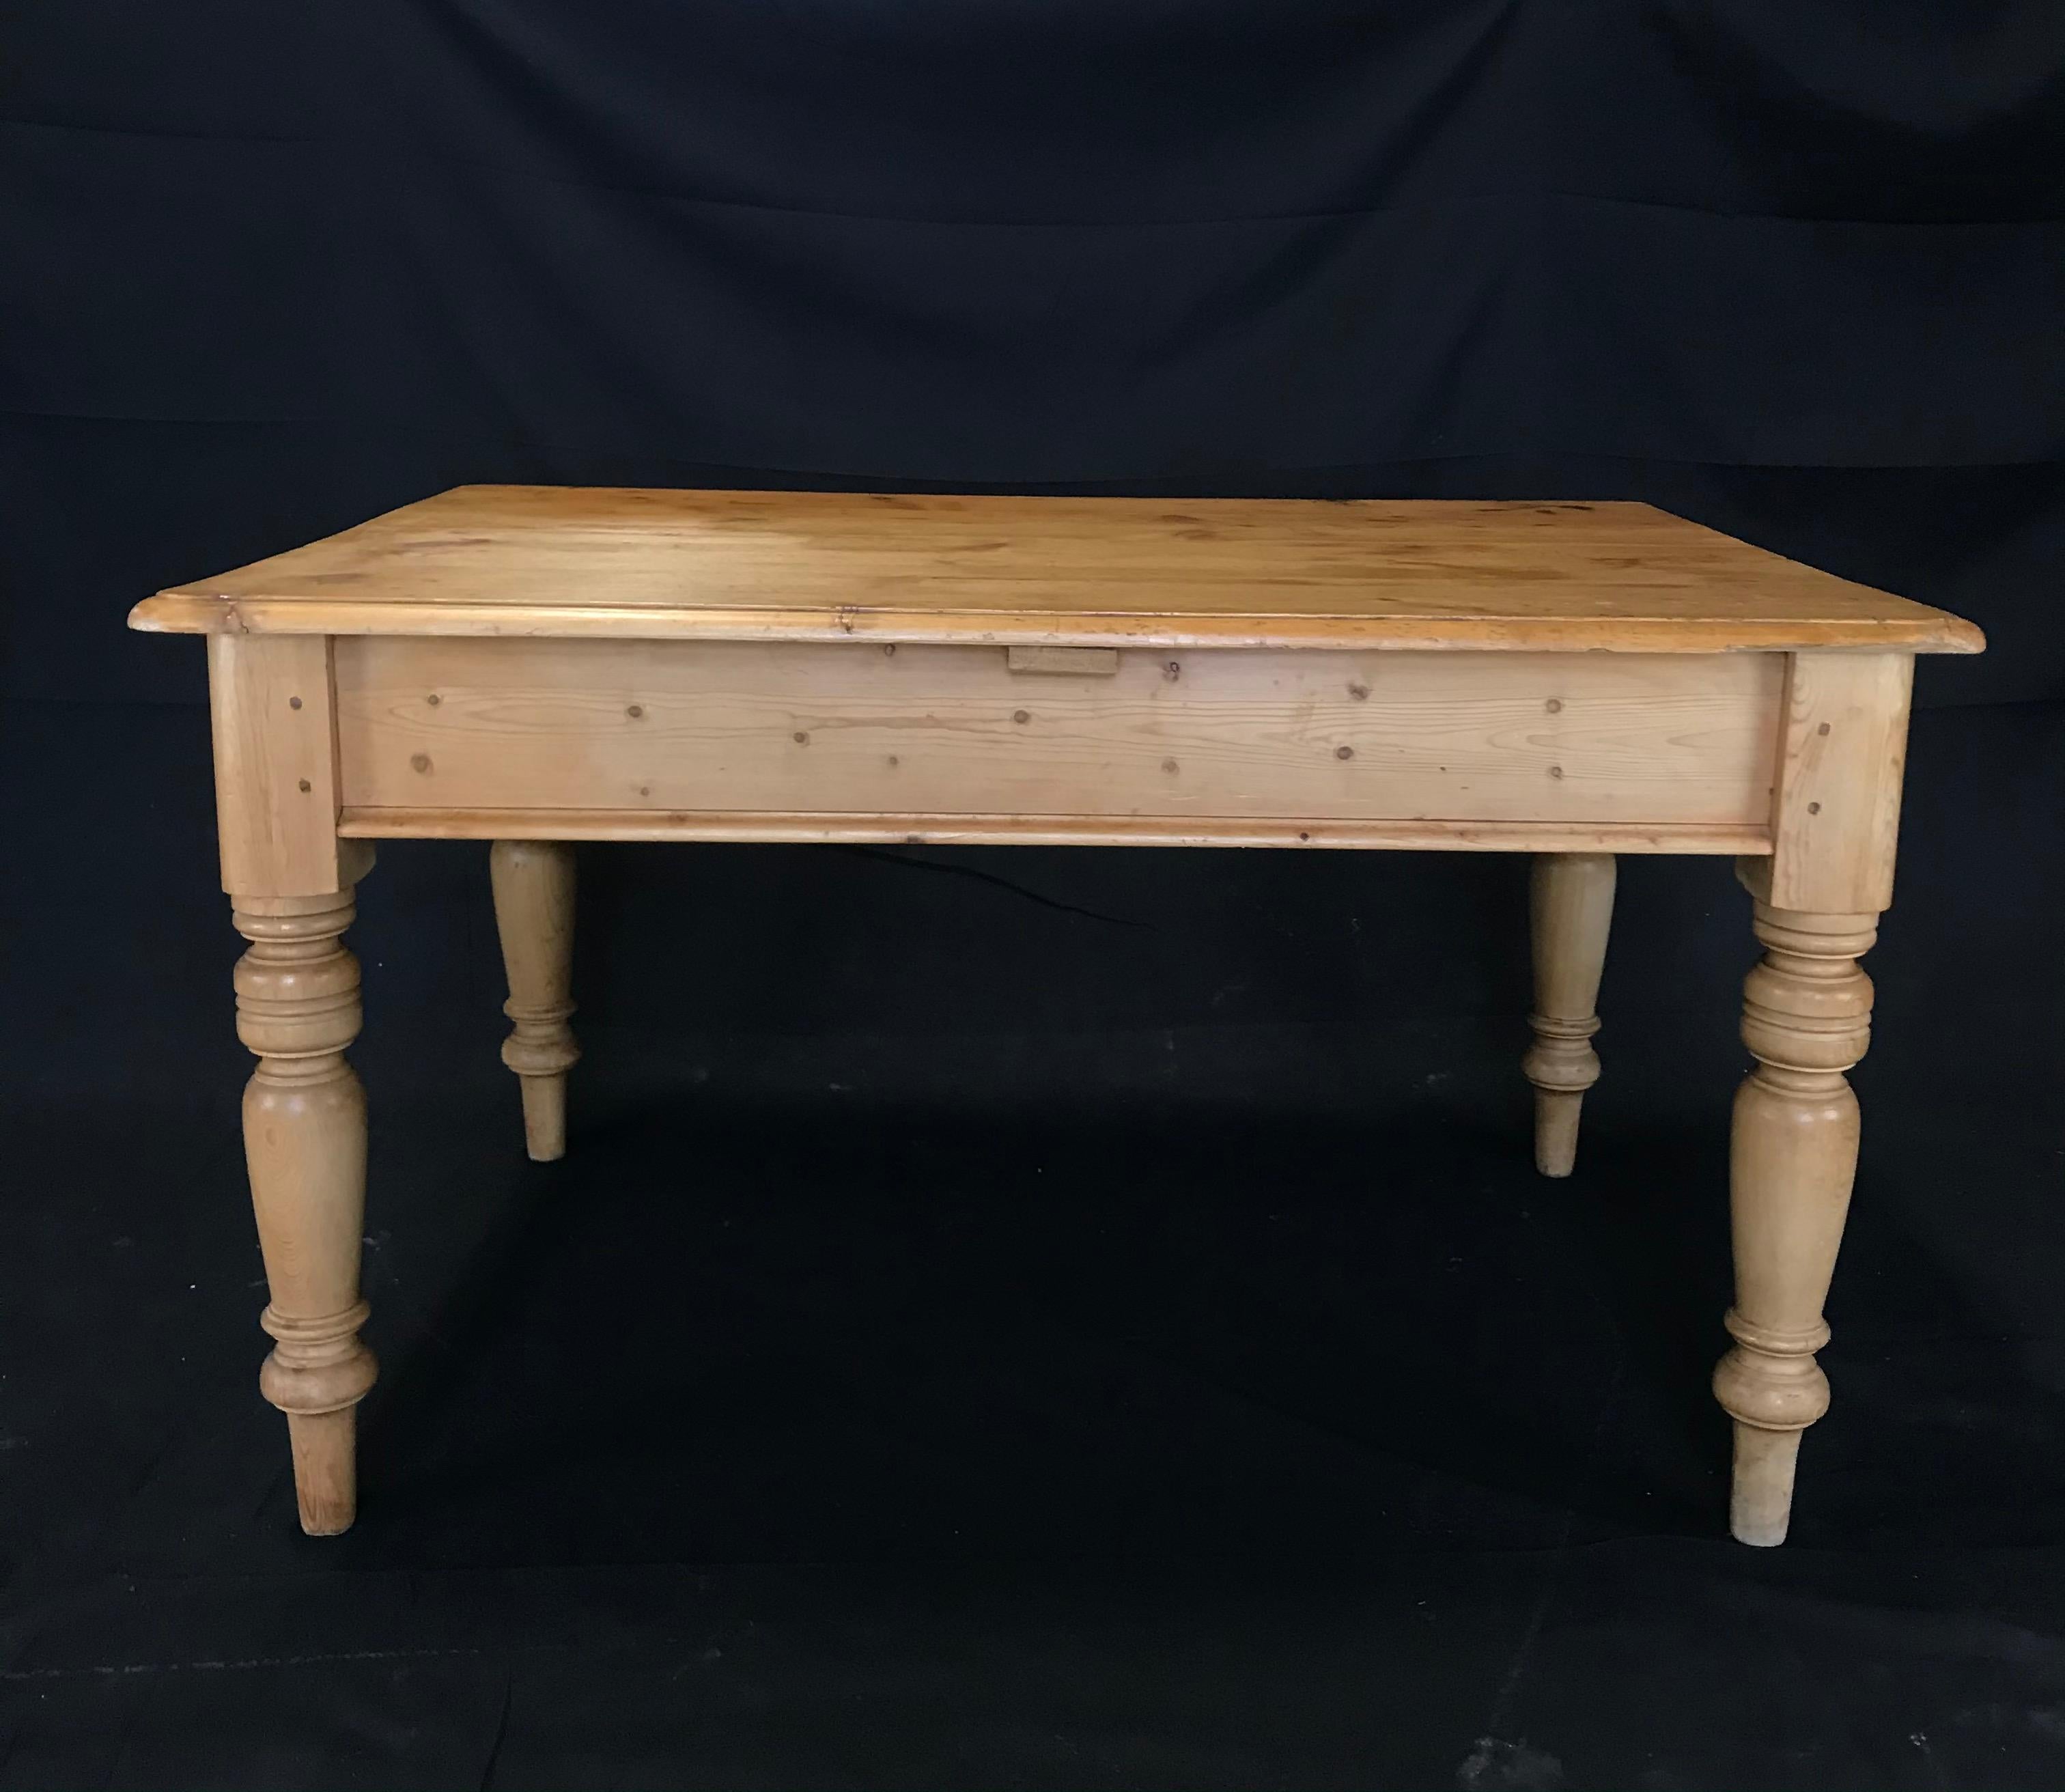 19th century Irish scrubbed pine table, work table or desk having beautiful beveled edge top and turned legs. The top is made up of scrubbed planks and follows down to a simple apron, supported on beautifully turned, slightly tapered legs, ending in